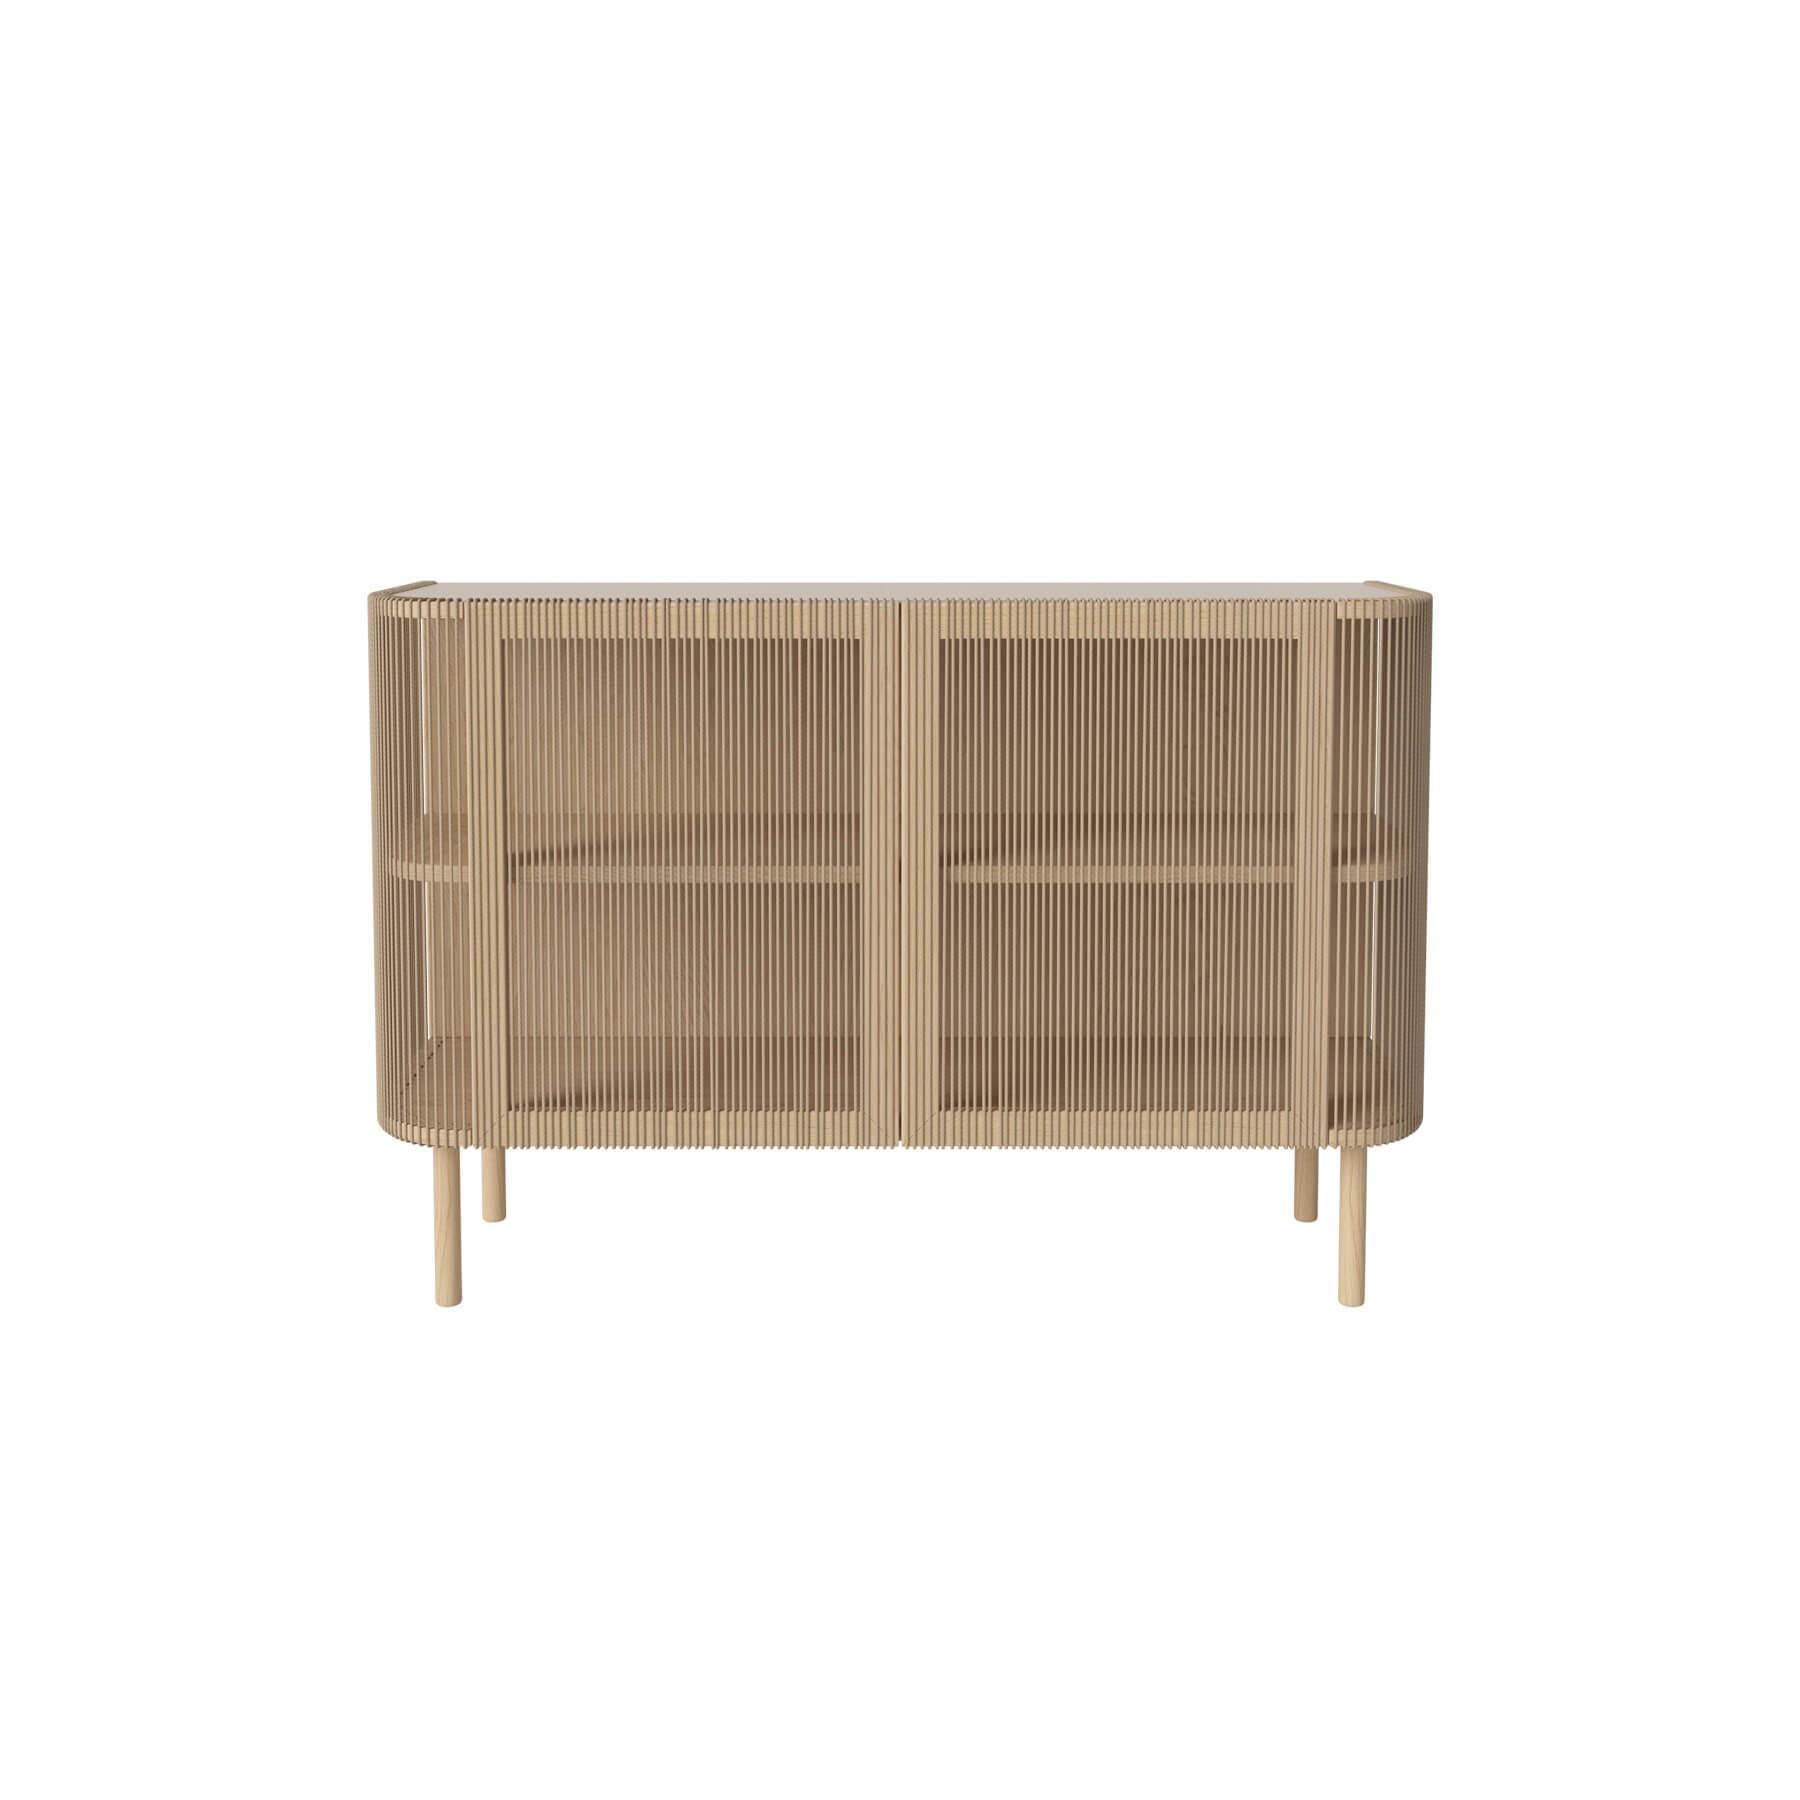 Bolia Cord Sideboard Natural Bolia Cord Small Light Wood Designer Furniture From Holloways Of Ludlow